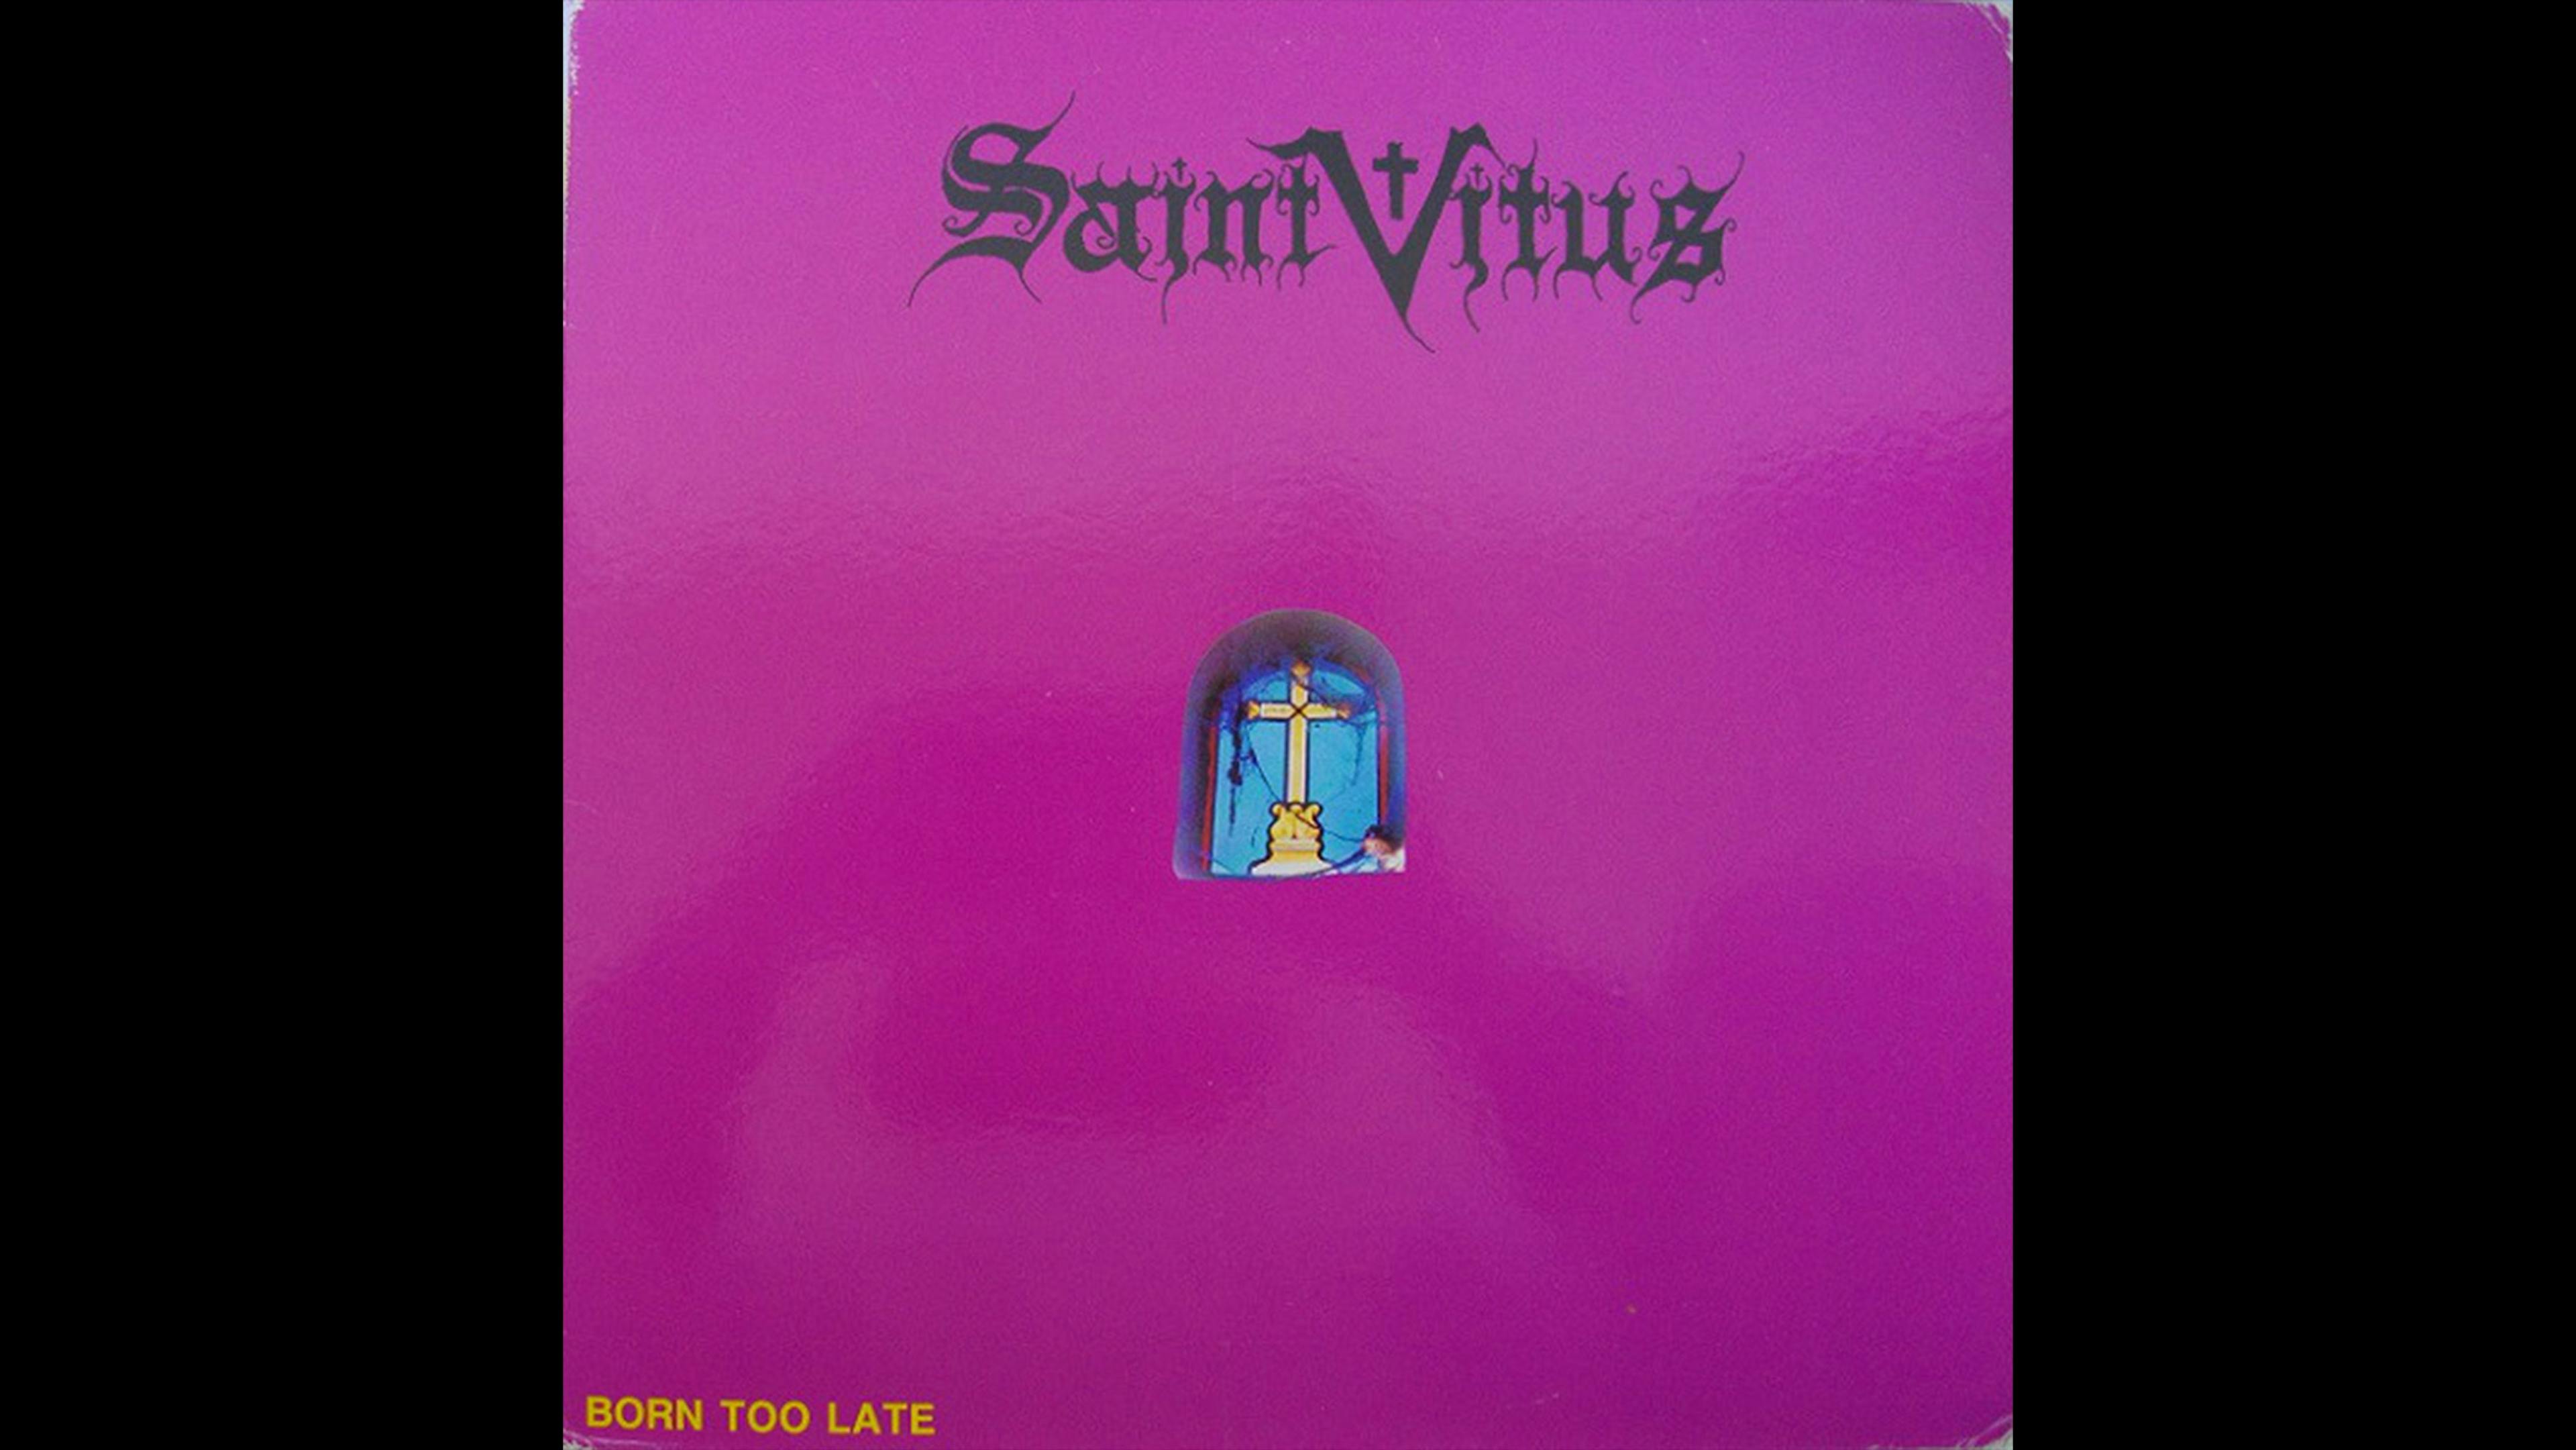 When Saint Vitus crawled out of Los Angeles in 1979, they didn’t fit in anywhere. Too slow and scruffy for a metal scene quickly falling for Van Halen and their technical wizardry, too long-haired for the punk scene they ended up on the edge of after Black Flag took a liking to them, their music became ever more downtrodden and miserable, reaching a peak on Born Too Late. With Dave Chandler’s primitive riffs and singer Wino’s lyrical snarls that ‘Alcohol knows it’s gonna win’ (Dying Inside) and how he ‘Can’t handle the human crowd’ (Clear Windowpane), the album is a depressed, cynical ‘fuck you’ to the world. Nowhere moreso that on the opening title-track, with its iconic, slo-mo riff and declaration that ‘I don’t belong and there’s nothing I can do / I was born too late, and I’ll never be like you’. Oddly, it’s quite uplifting, in a defiant way. It certainly did the business for Dave Grohl, who invited Wino to jam with him for his Probot project.